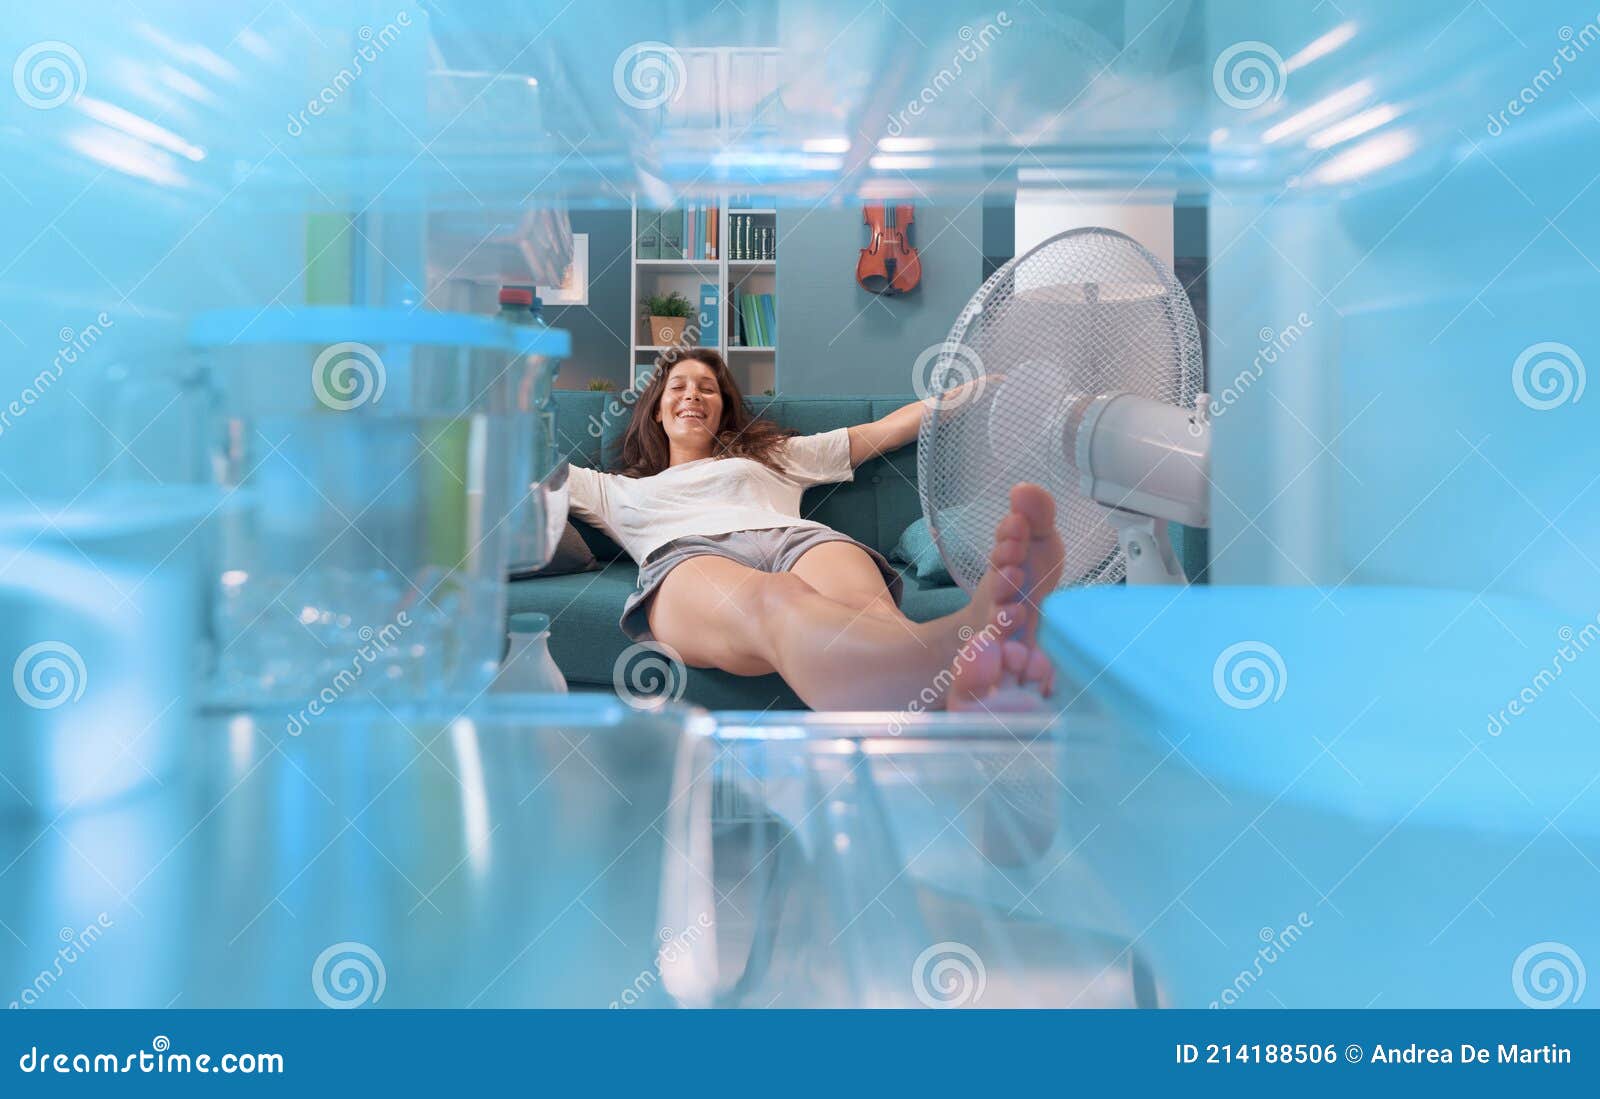 woman keeping herself cool at home in the summer